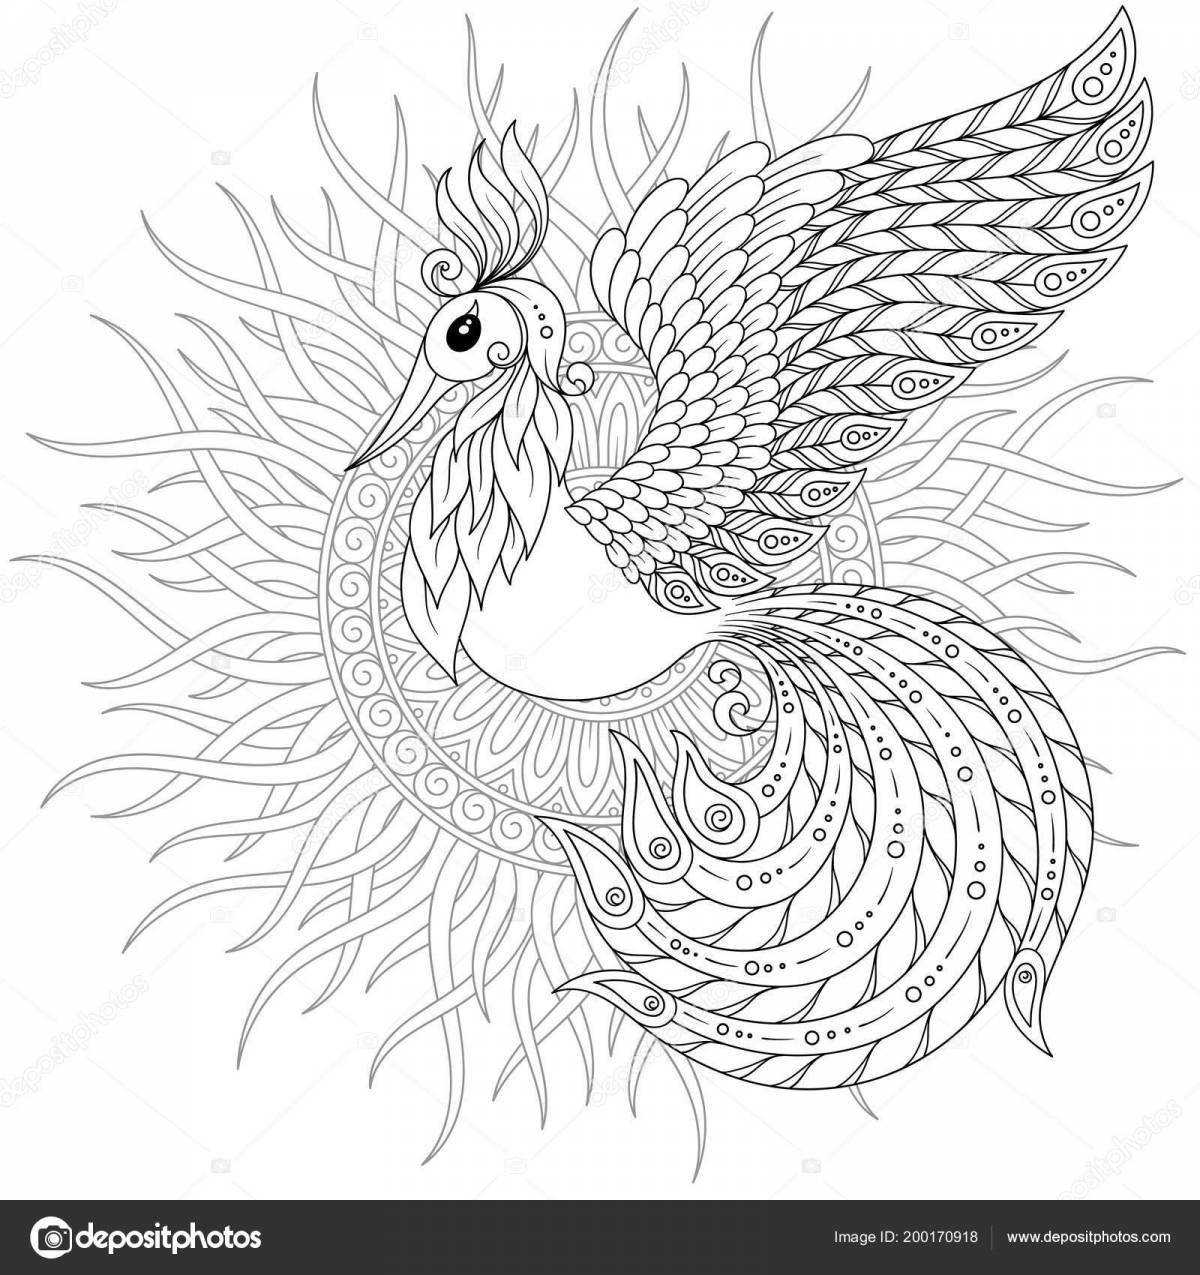 Charming bird coloring page